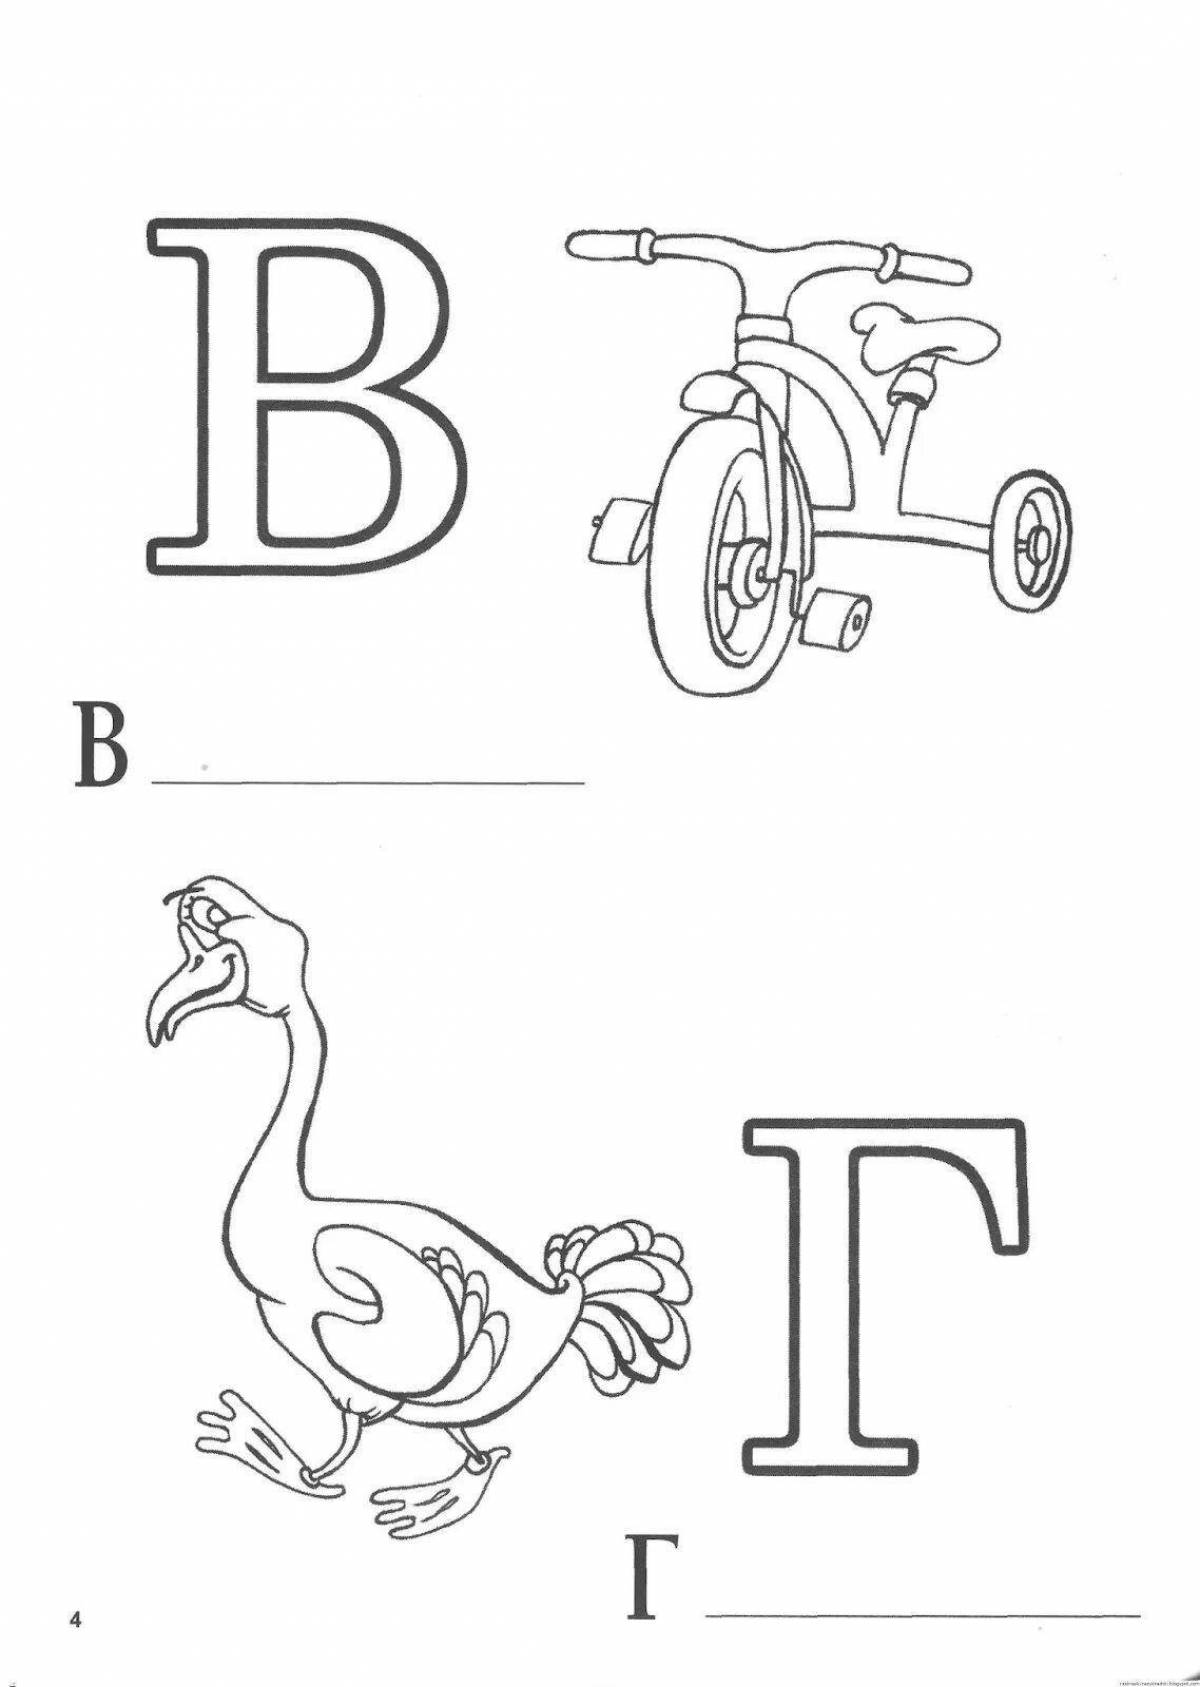 Bright alphabet coloring book for kids